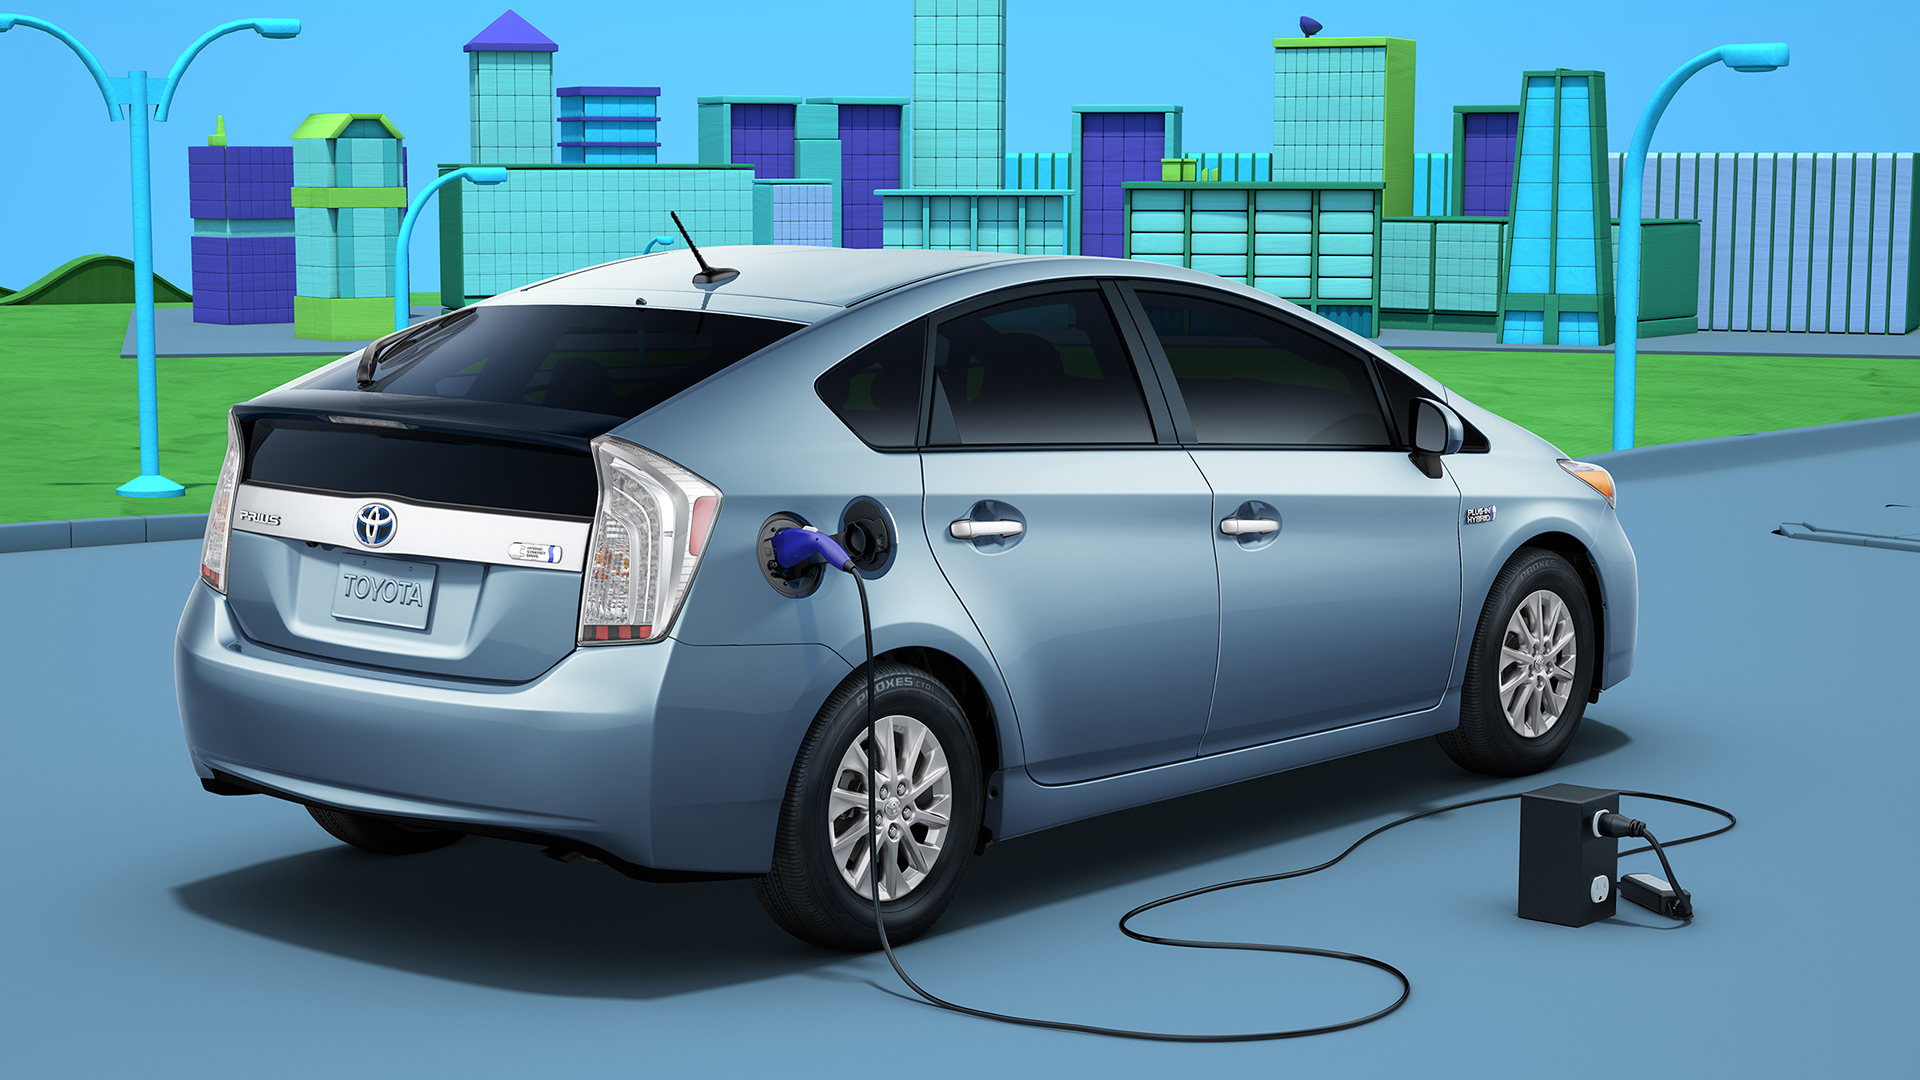 How does the resale value of Plug-in Hybrids compare to gas cars?